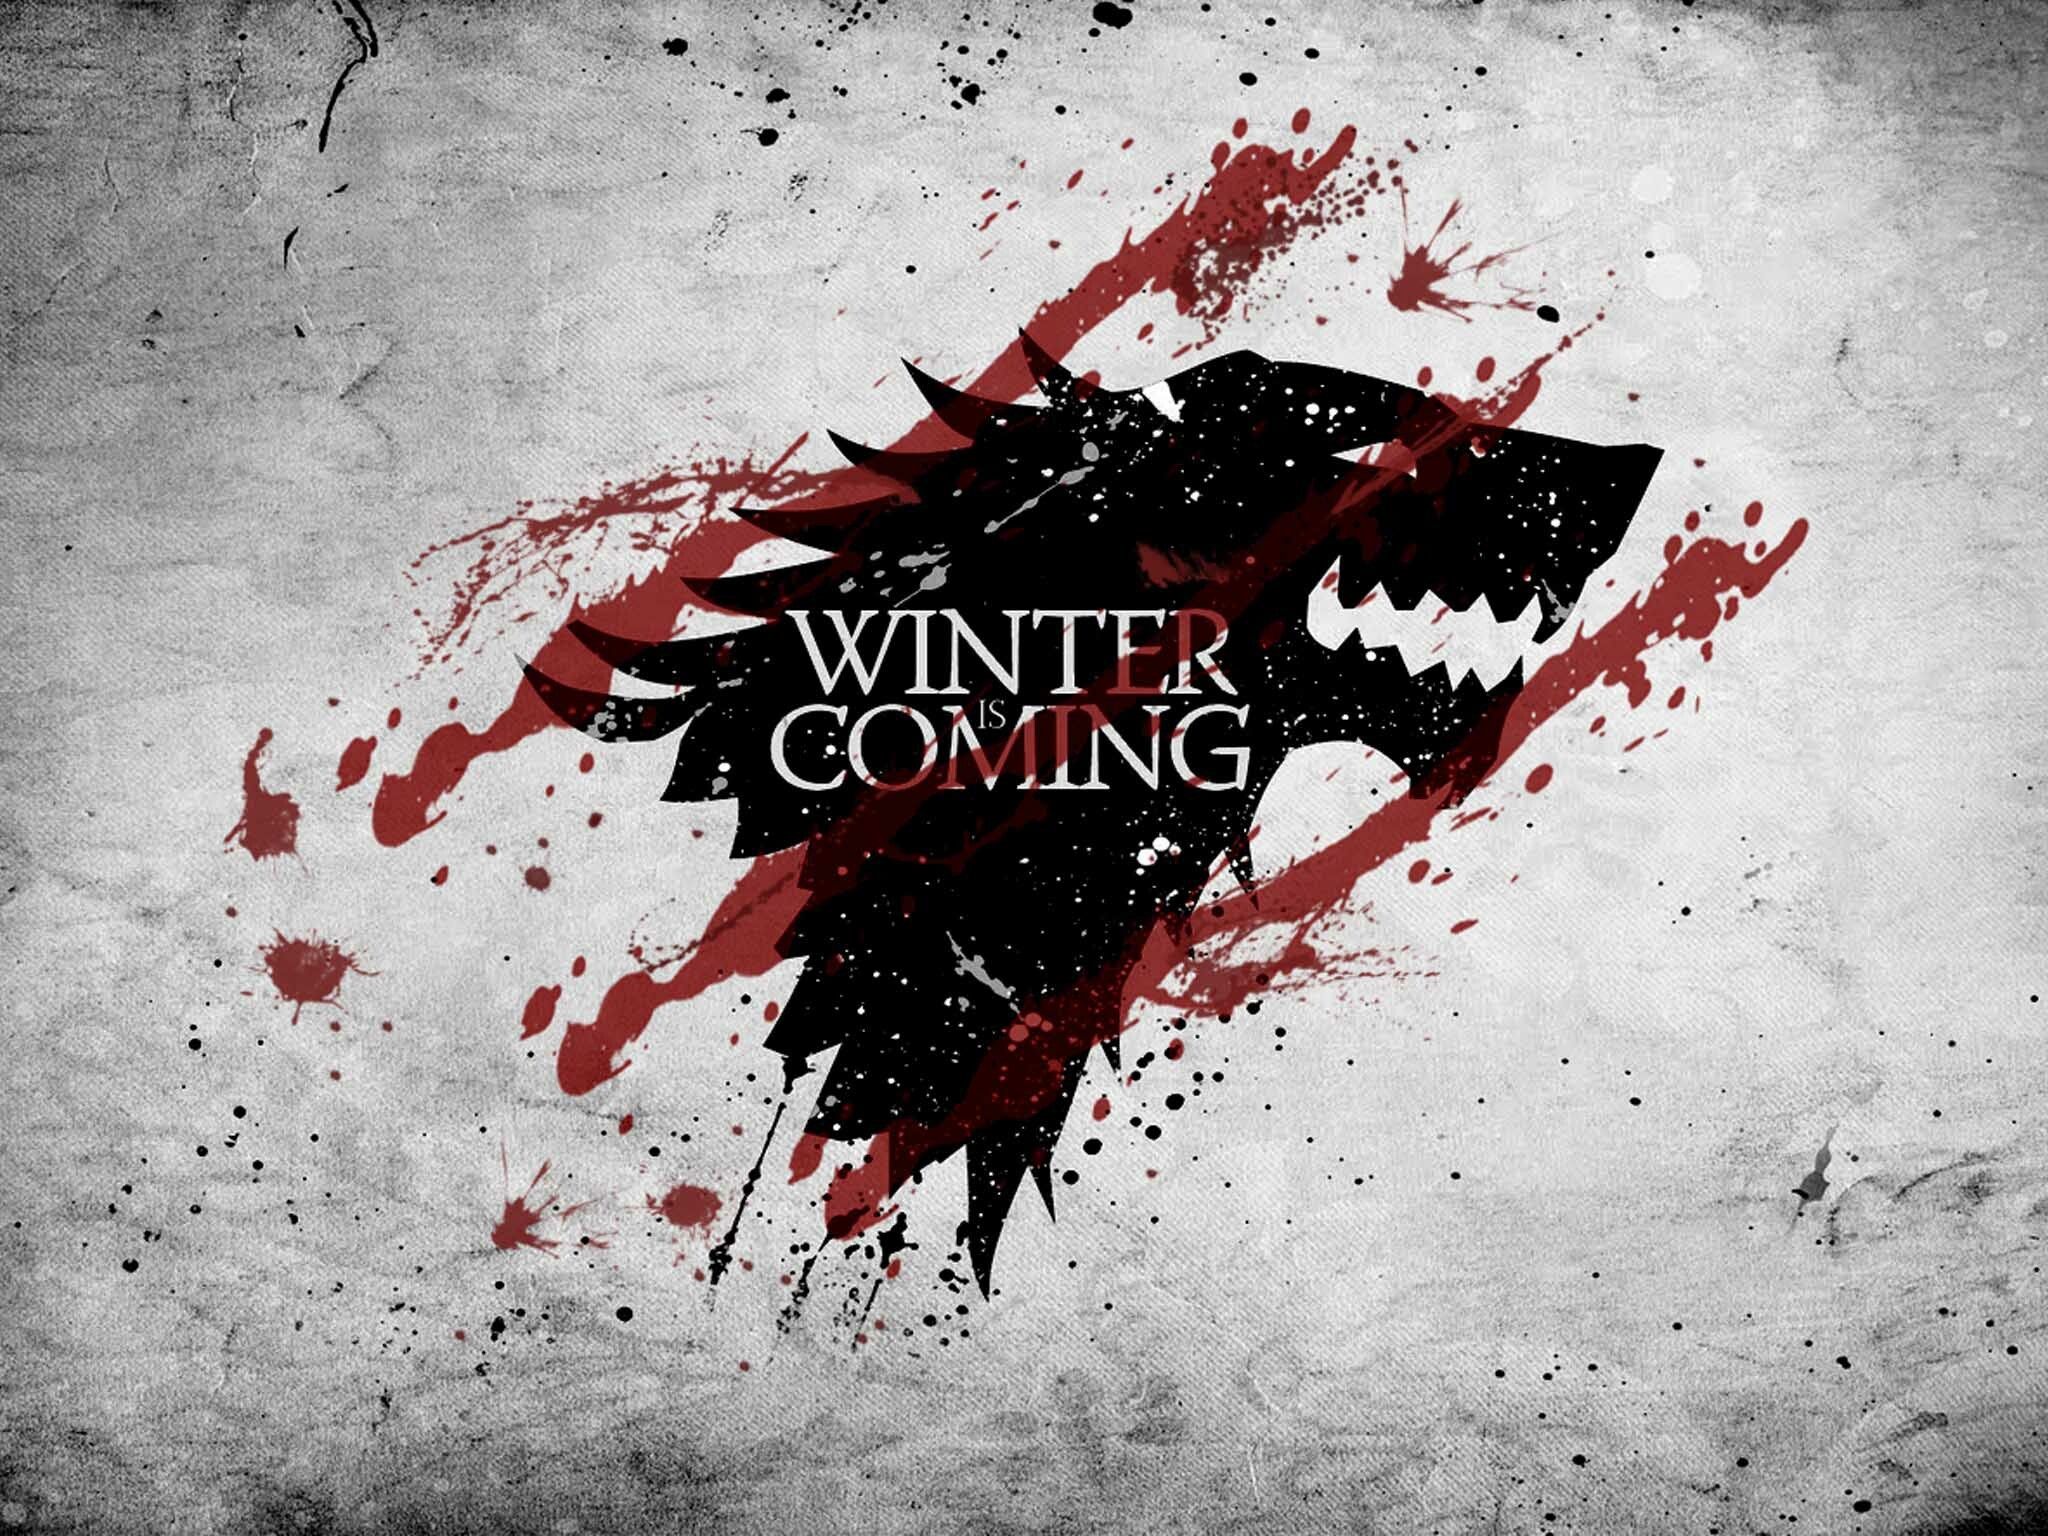 Game of Thrones: Winter is coming, House Stark, The North. 2050x1540 HD Wallpaper.